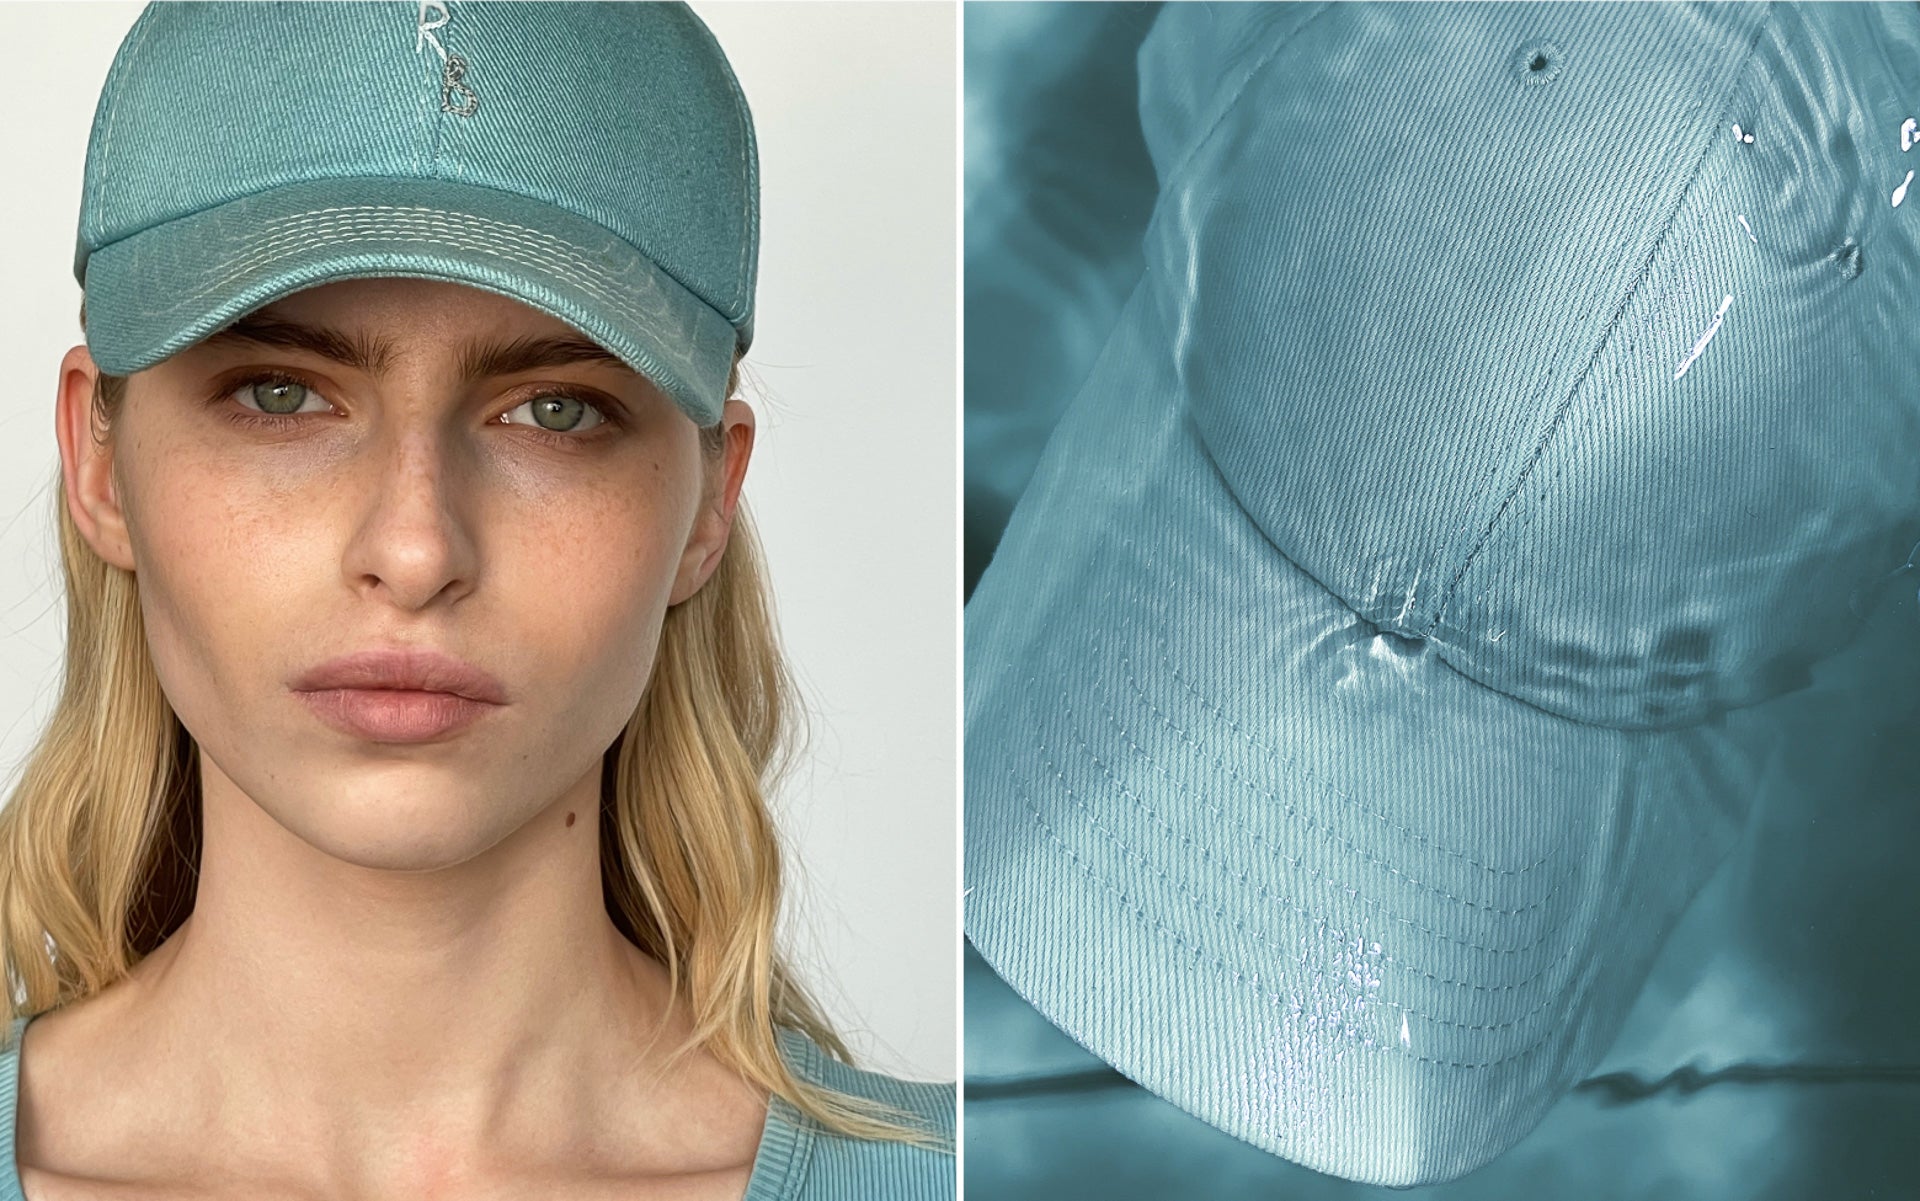 A color for every day with RB Baseball Cap